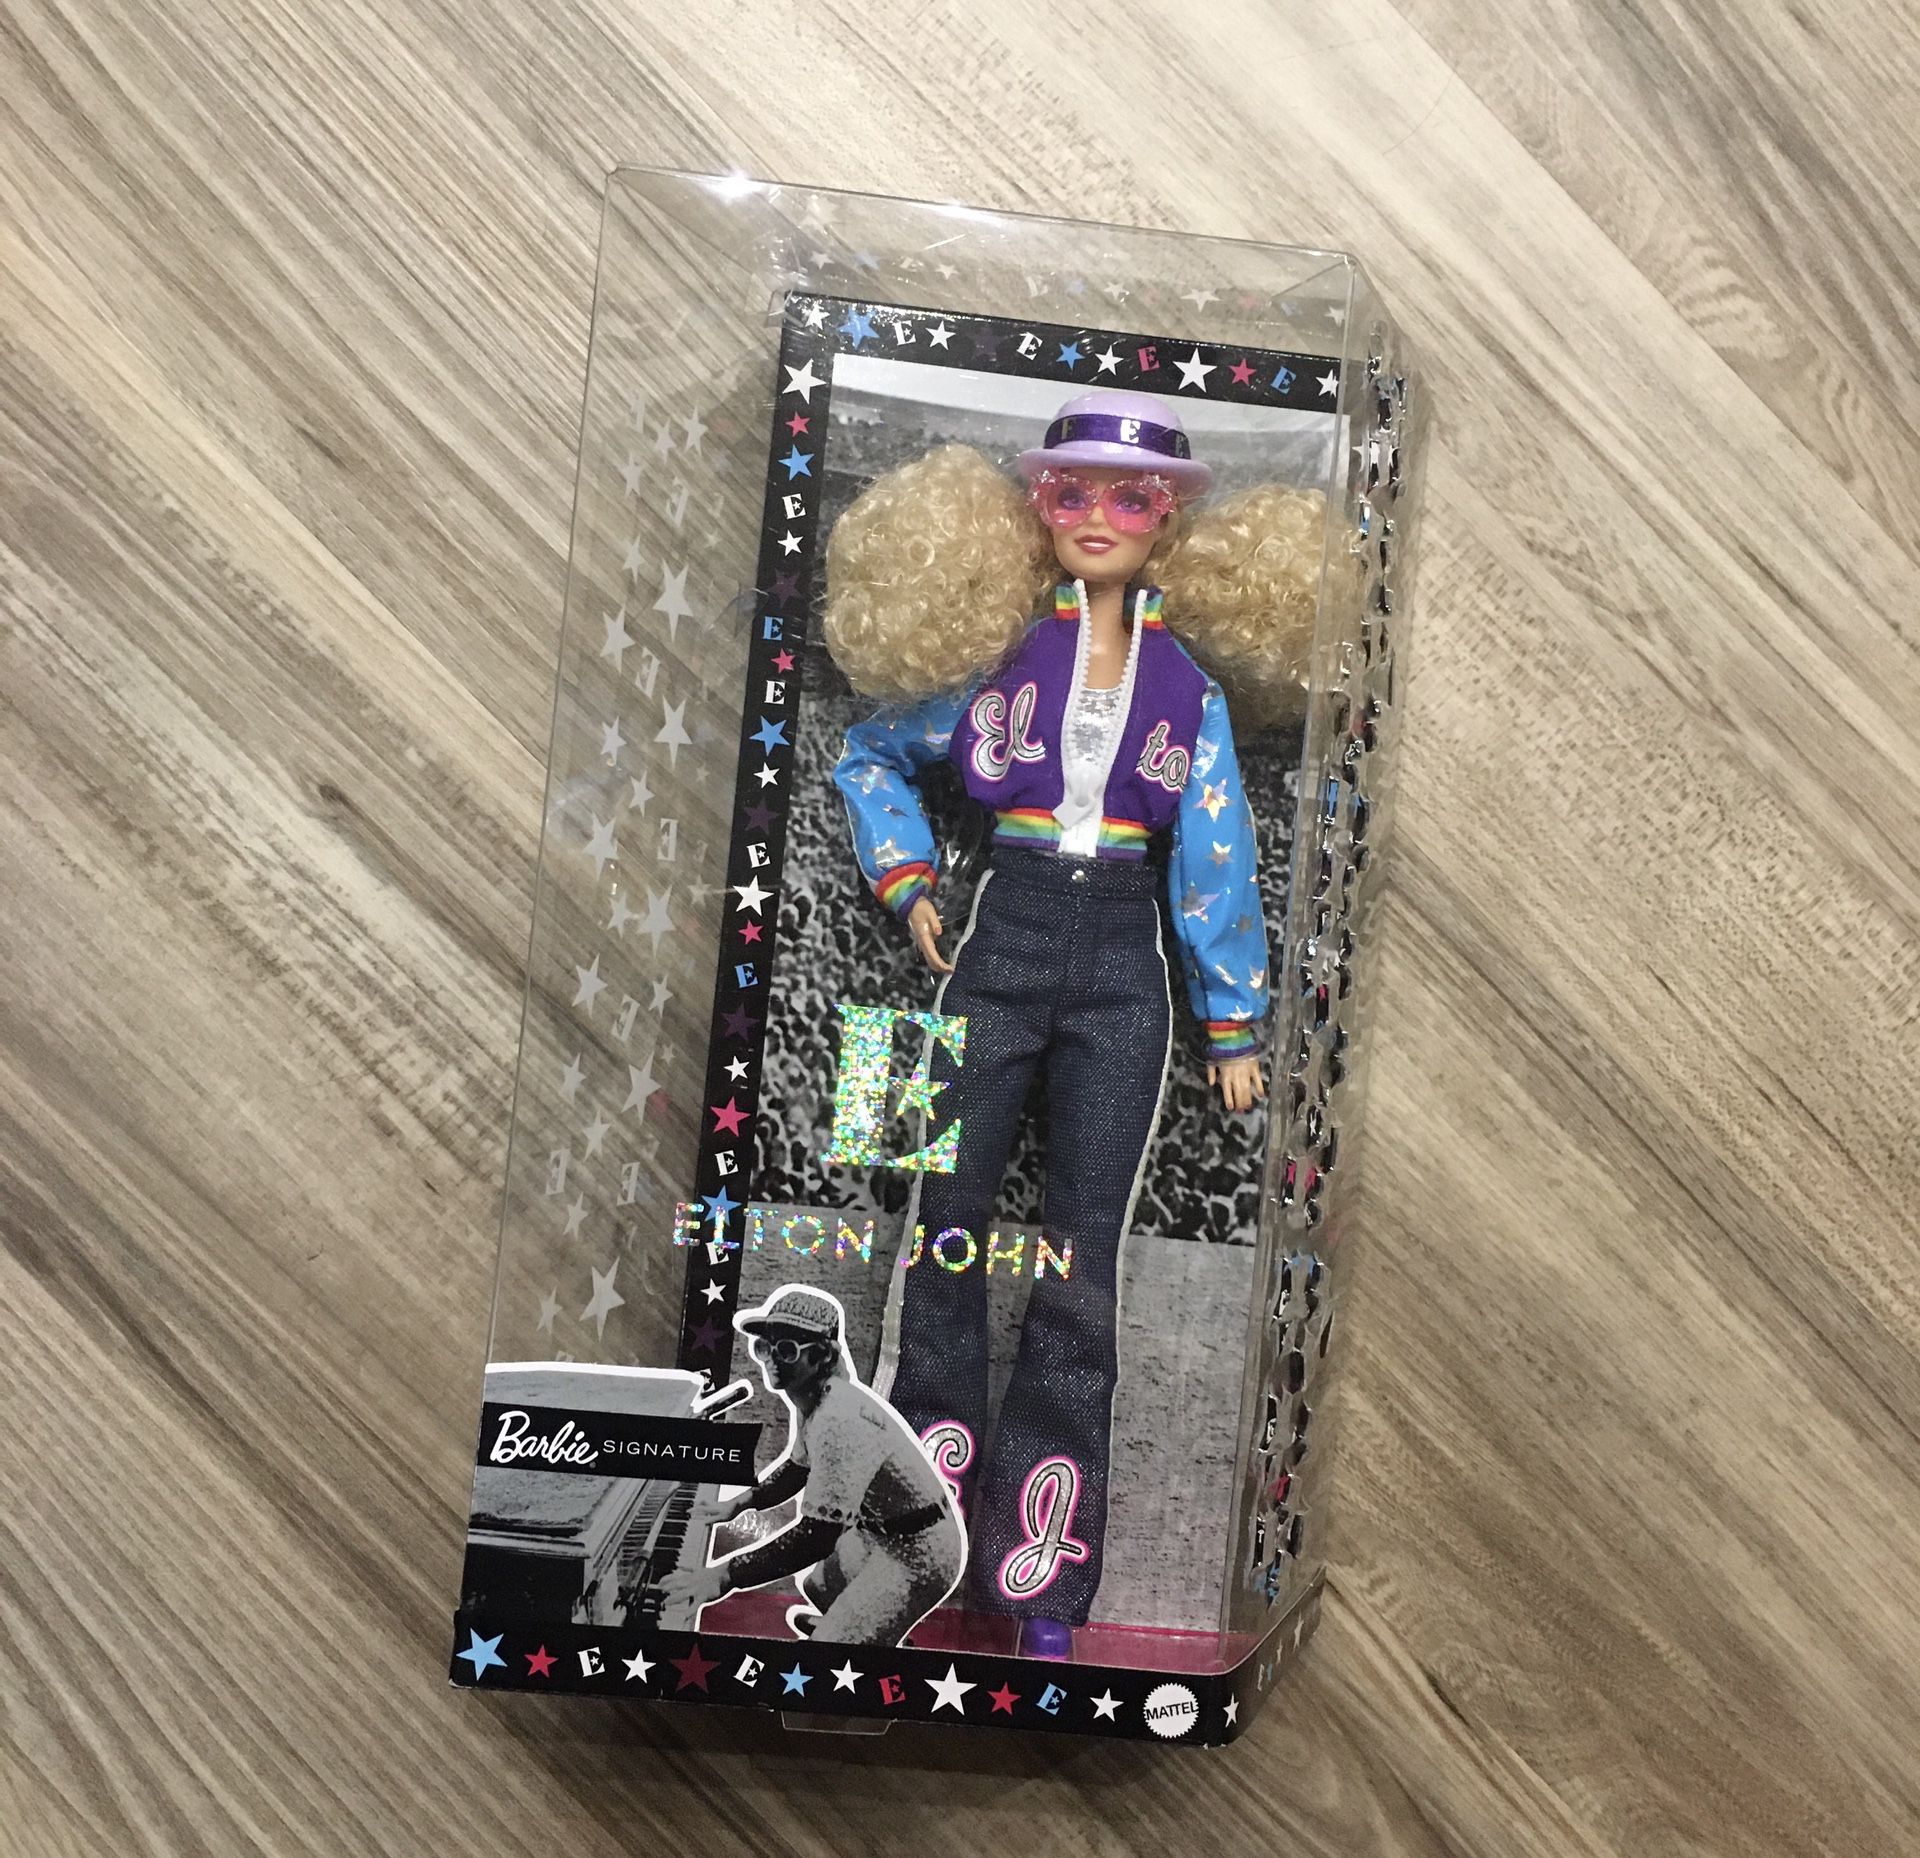 Barbie Elton John Limited Edition Doll - 2 AVAILABLE